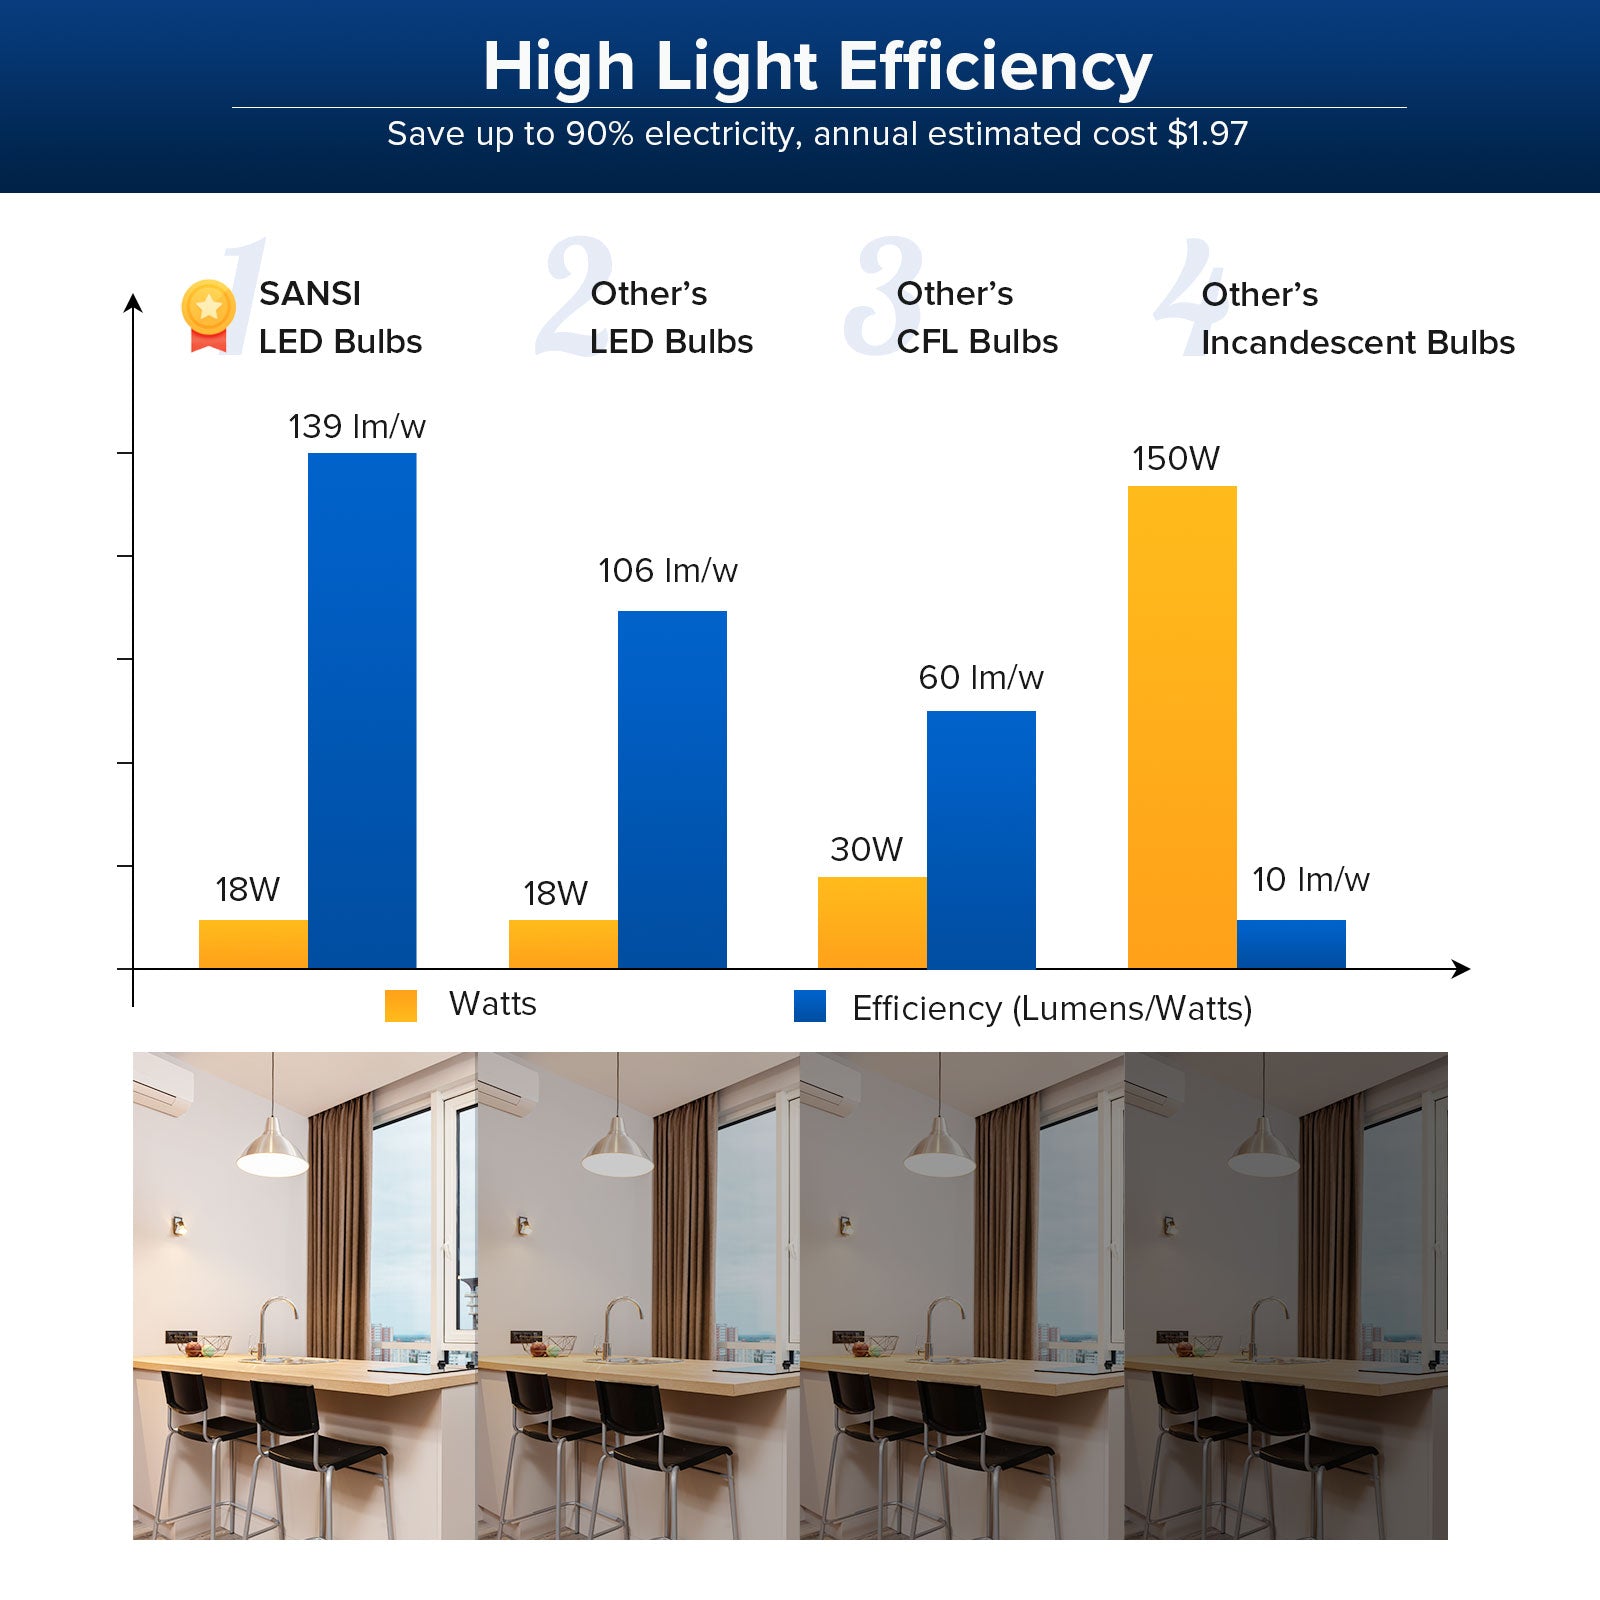 A21 18W led light bulb  has high light efficiency, save up to 90% electricity, annual estimated cost $1.97